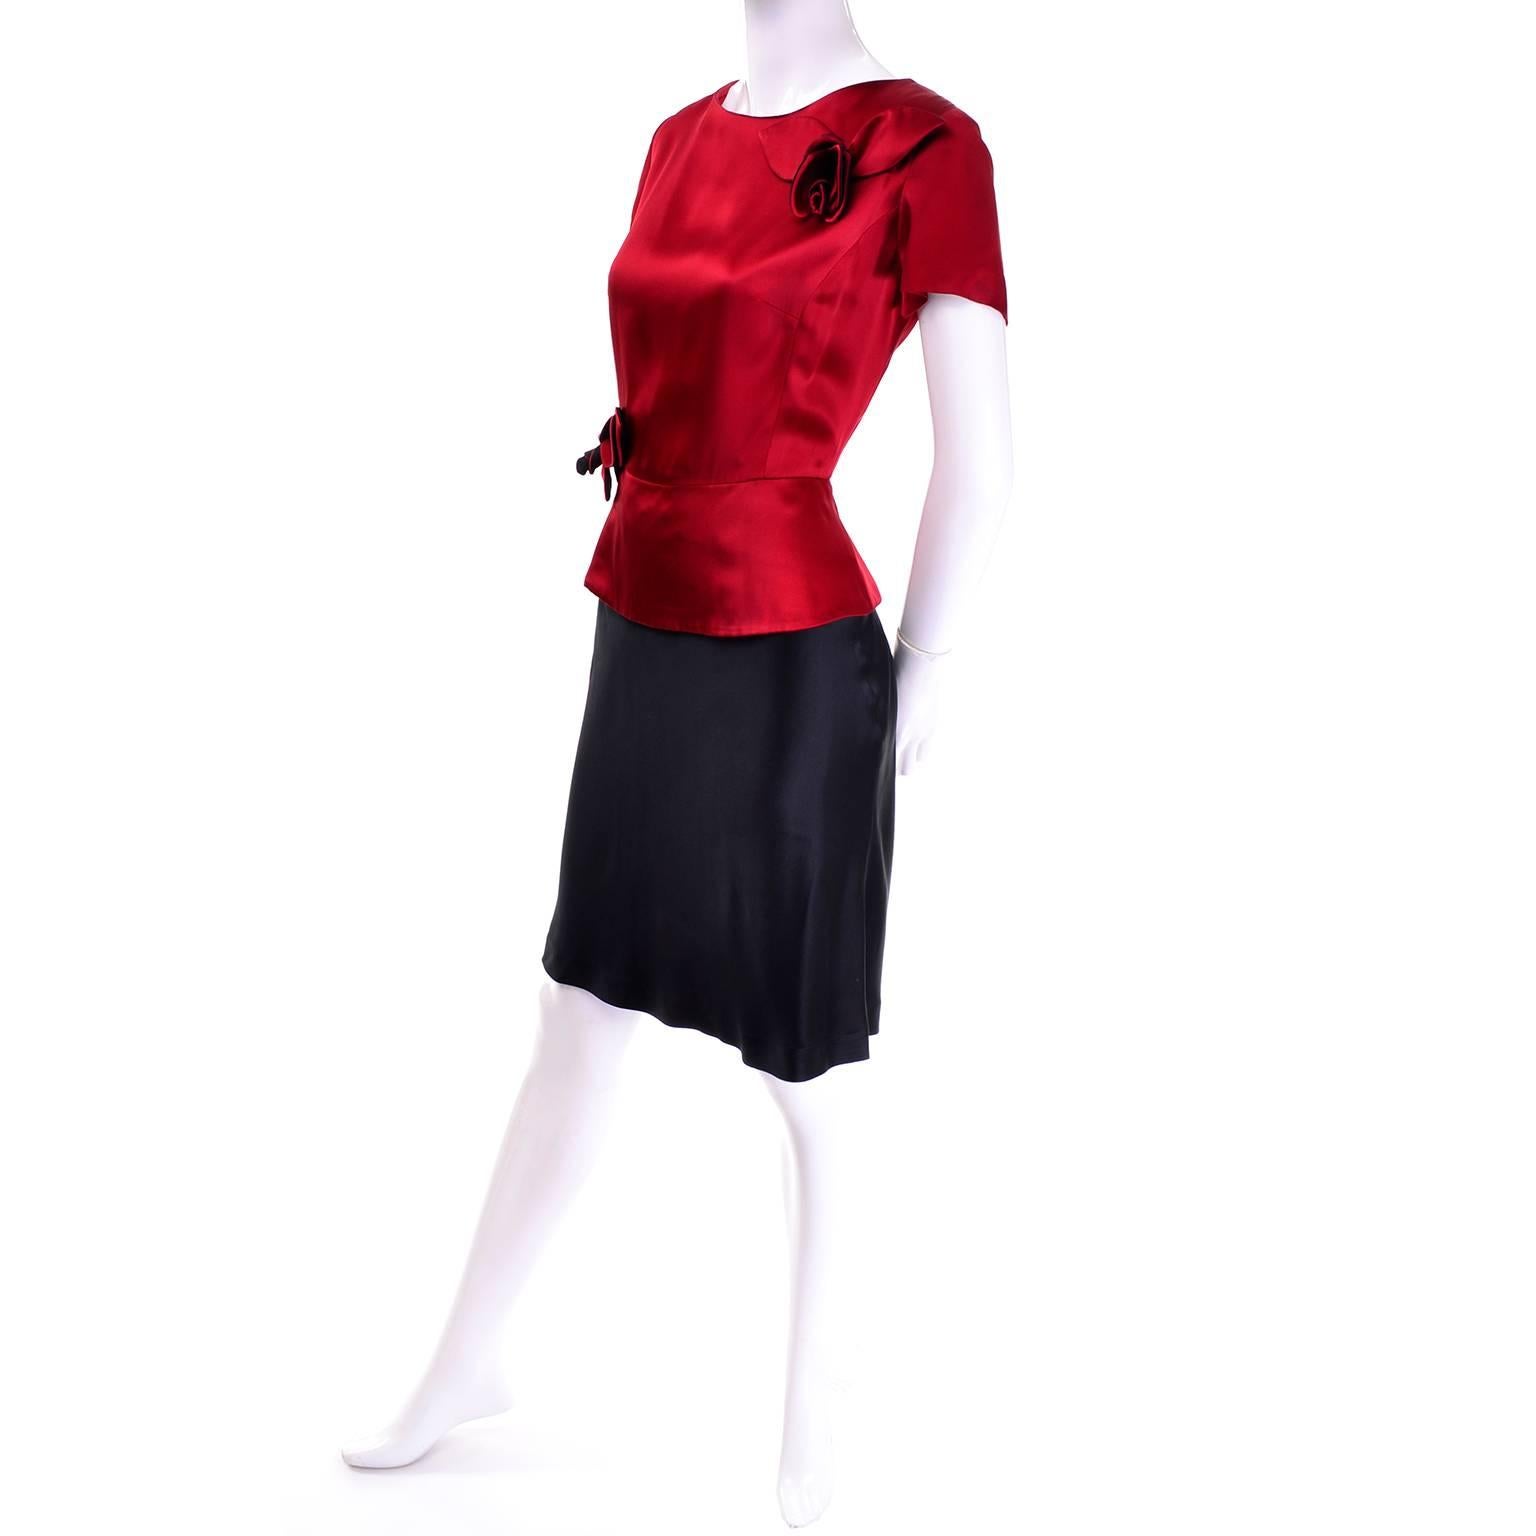 Women's 1990s Vintage Moschino Red and Black Color Block Dress W/ Mini Peplum and Flower